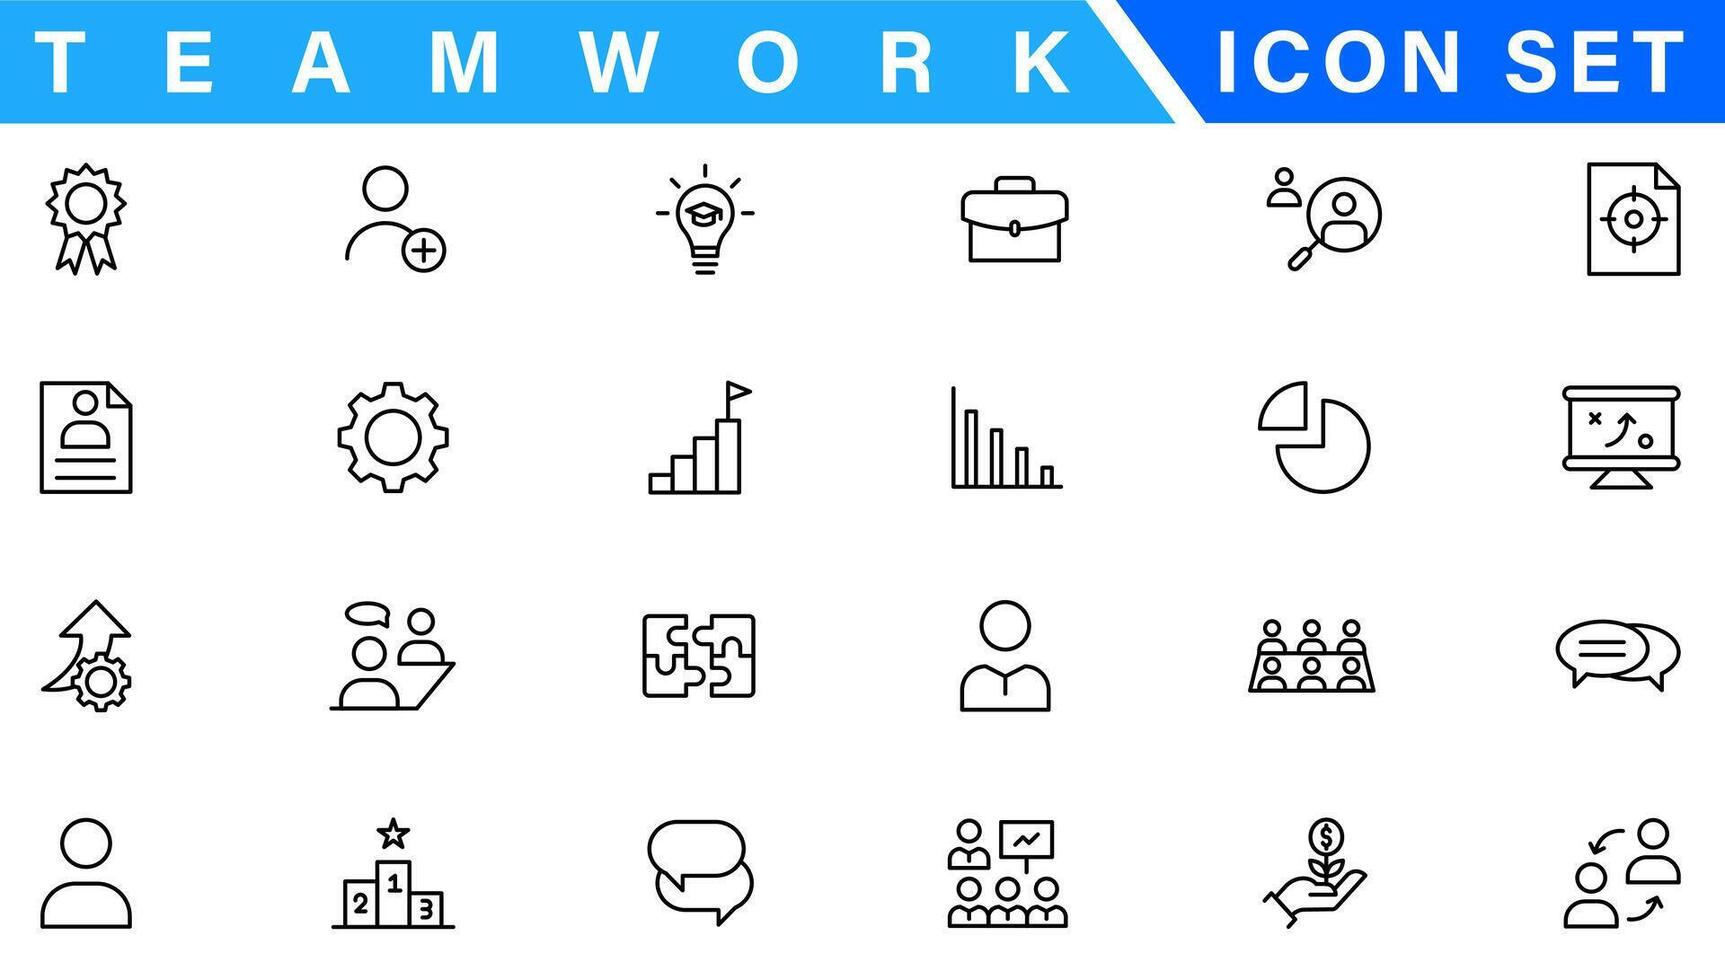 Business people line icons set. Businessman outline icons collection. Teamwork, human resources, meeting, partnership, meeting, work group, success, resume - stock vecto vector